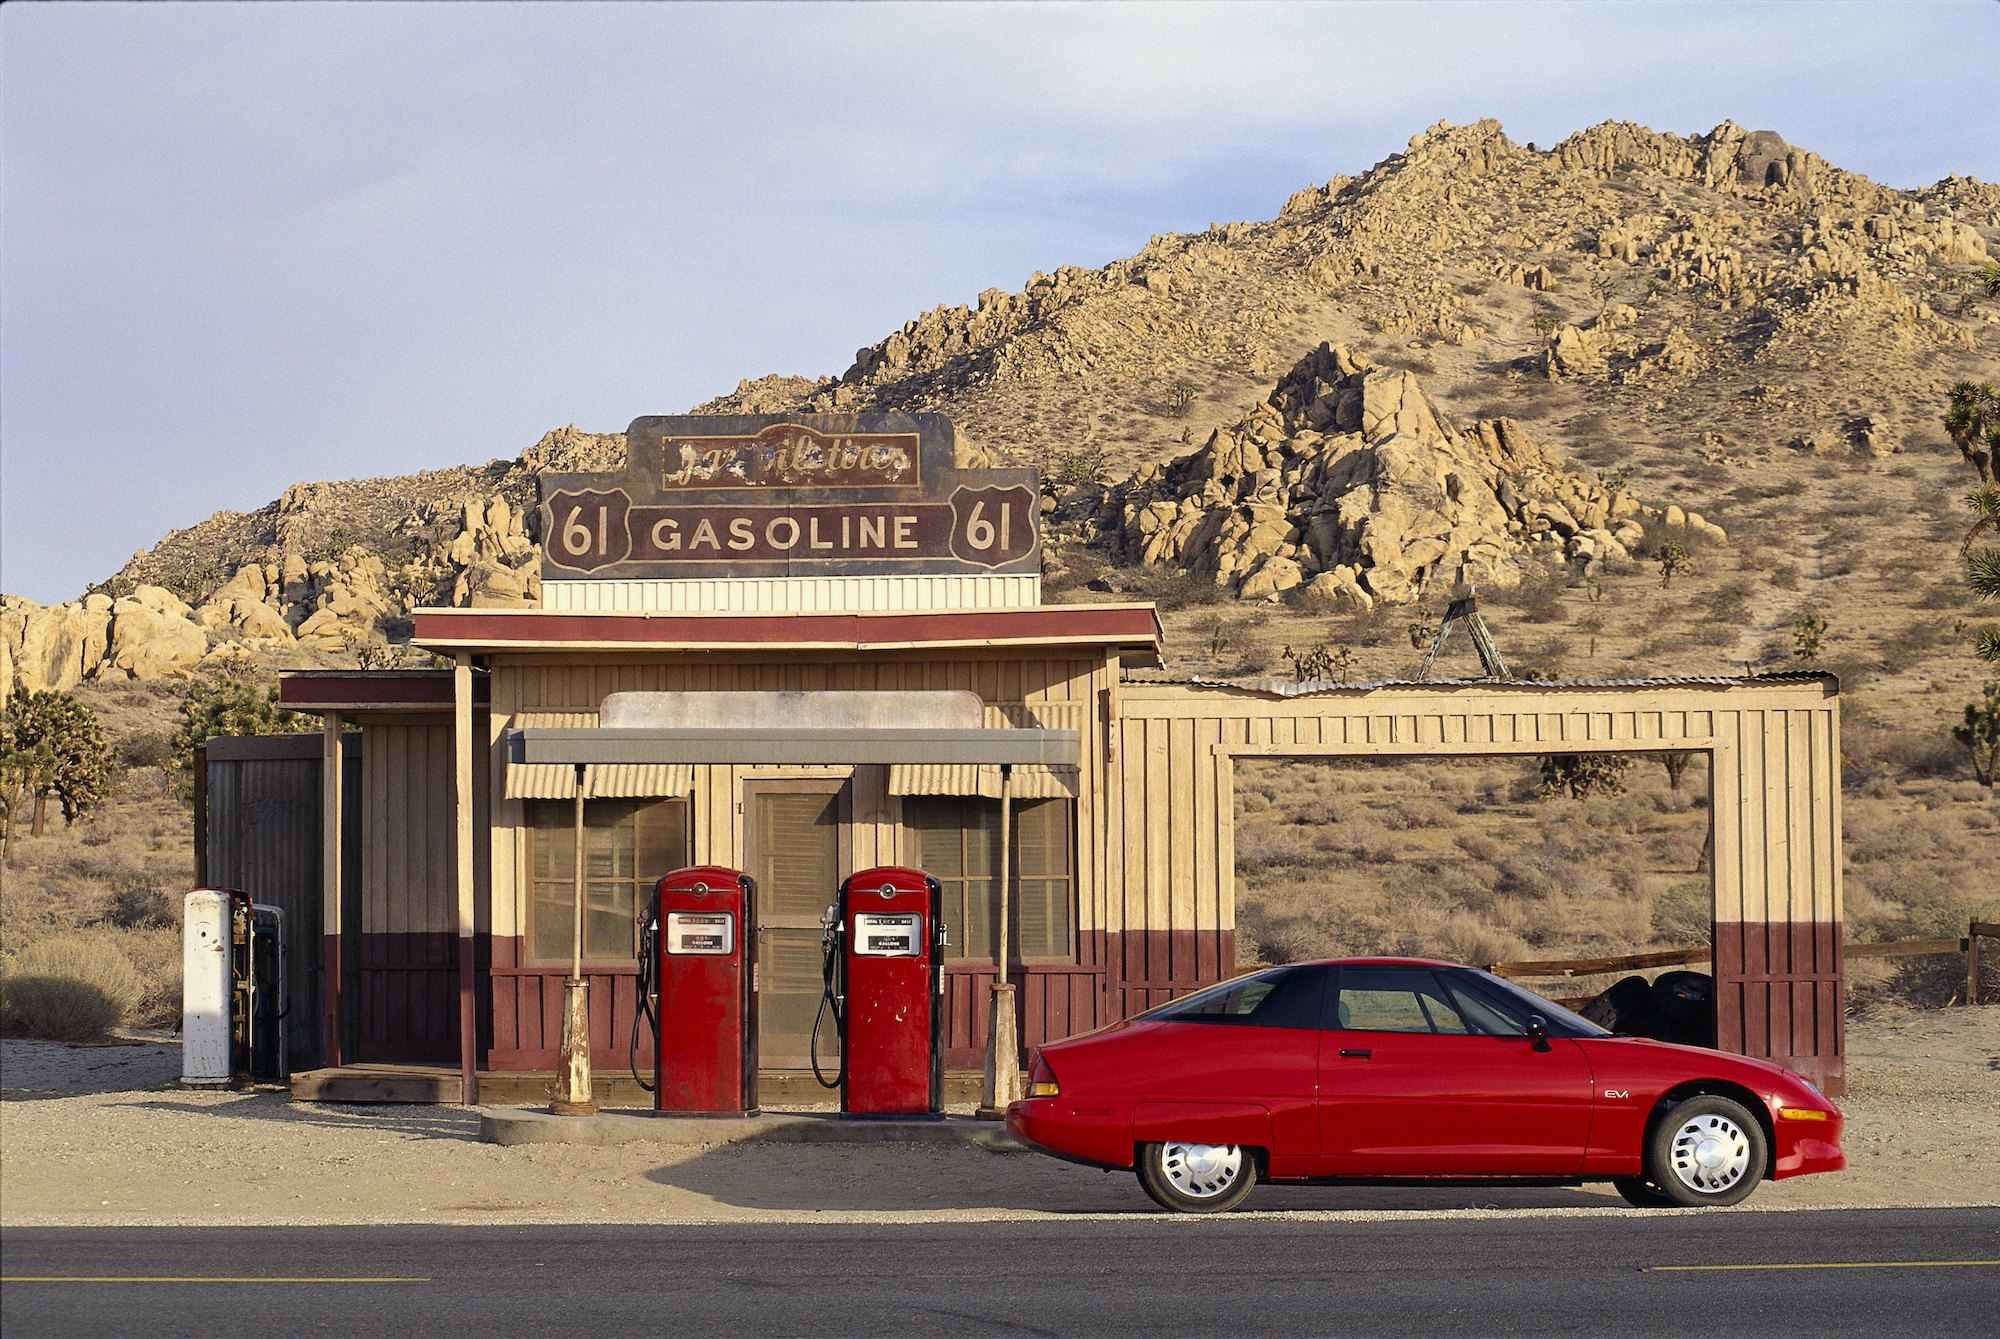 A red GM EV1 electric car parked at a rural gas station in April 1997